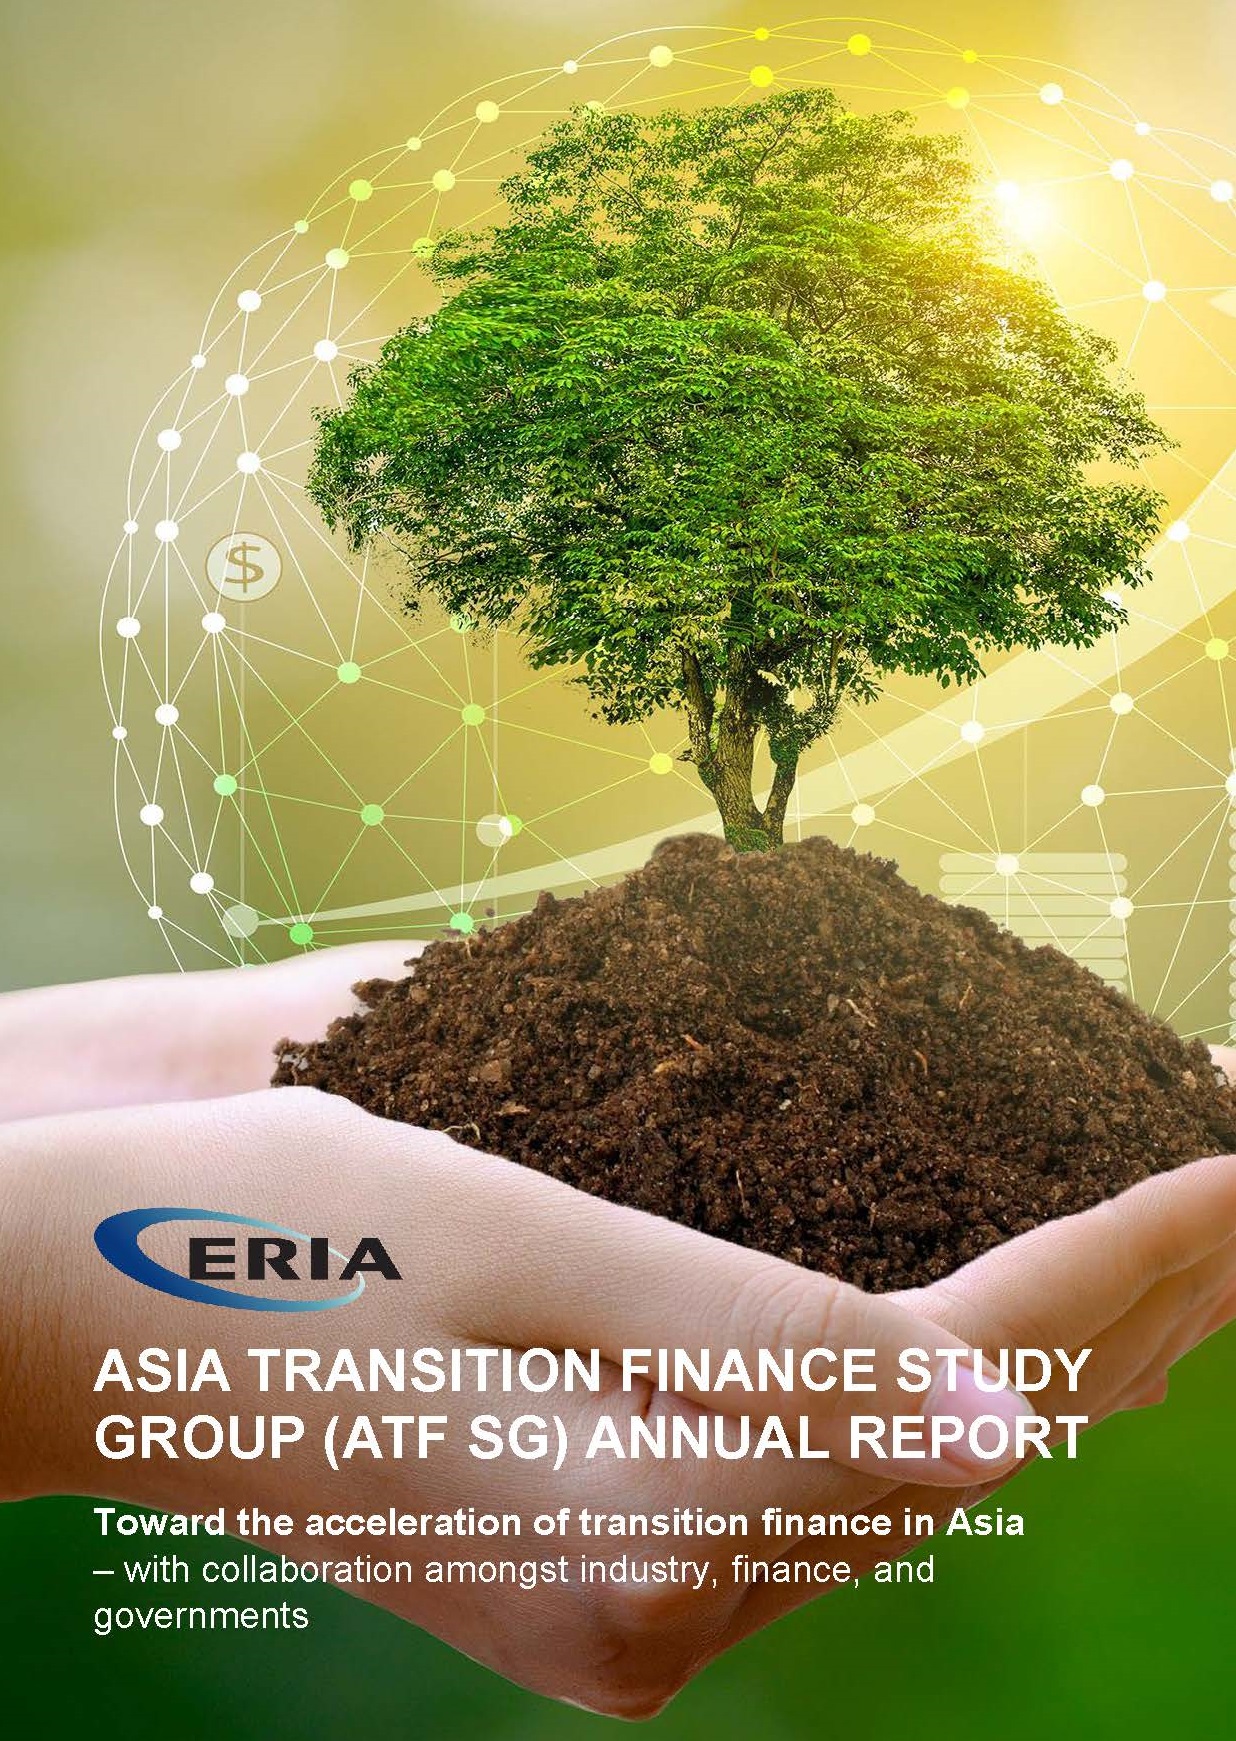 Asia Transition Finance Study Group (ATF SG) Annual Report